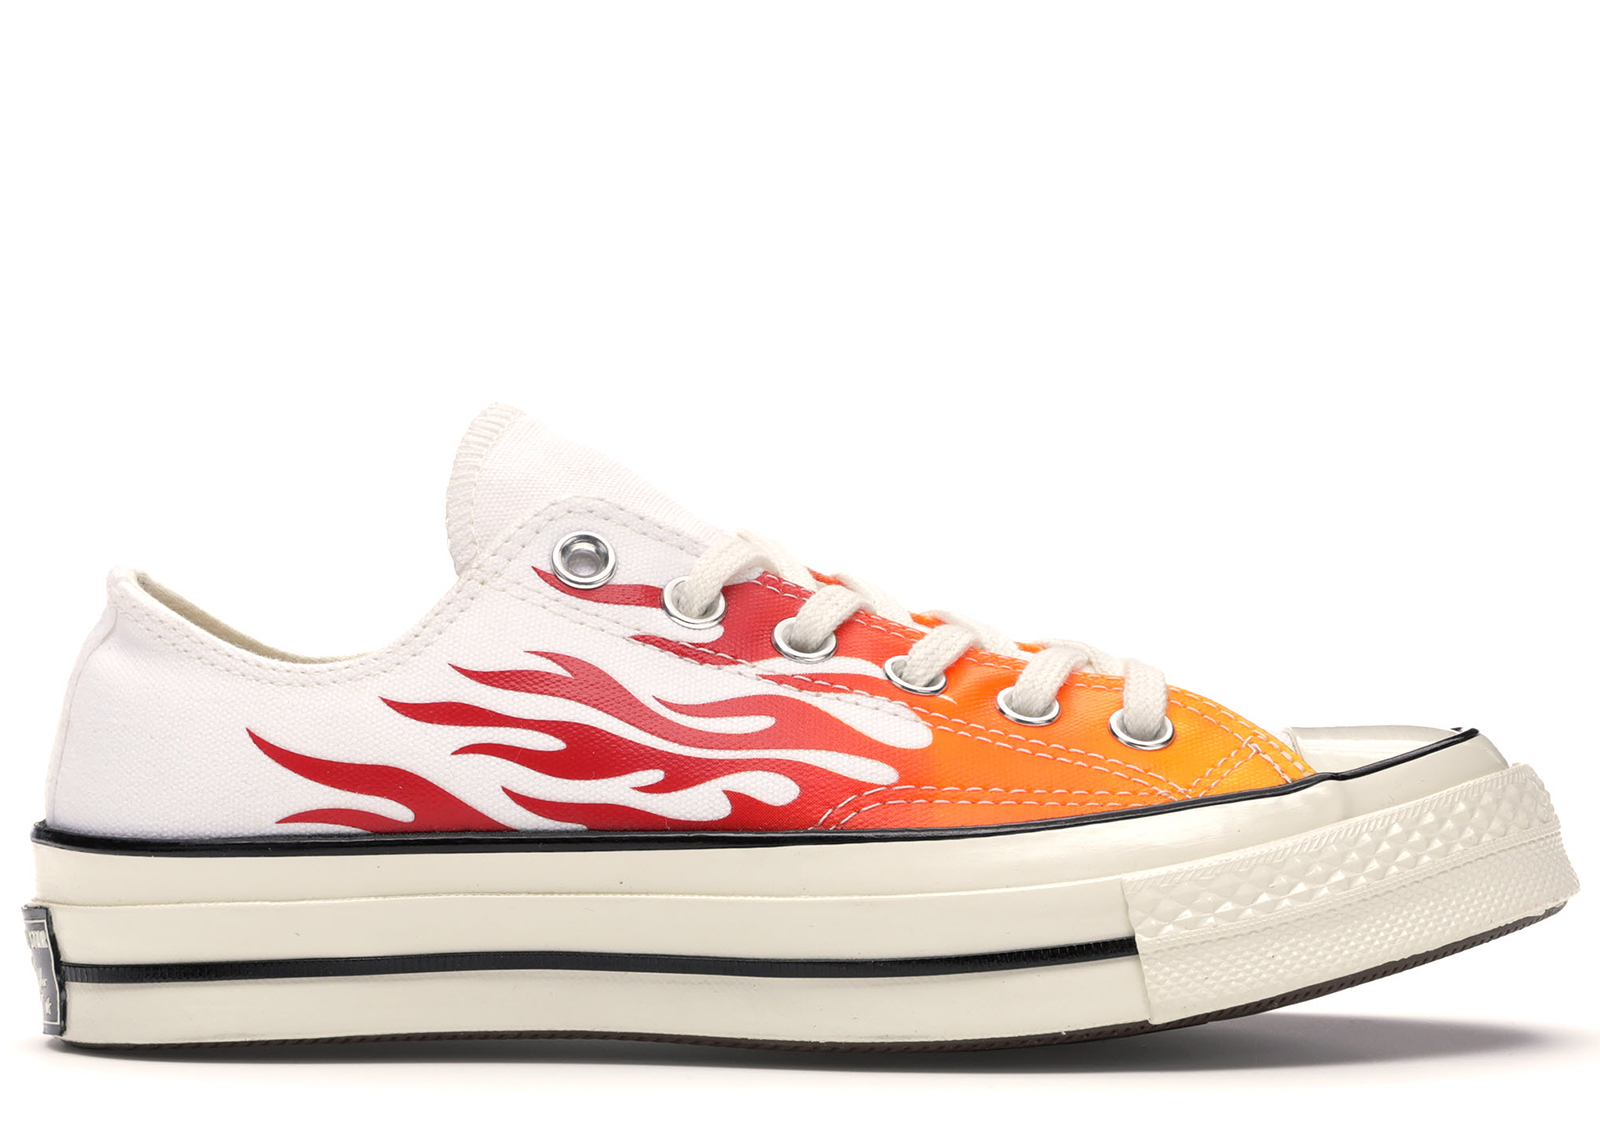 converse flame low